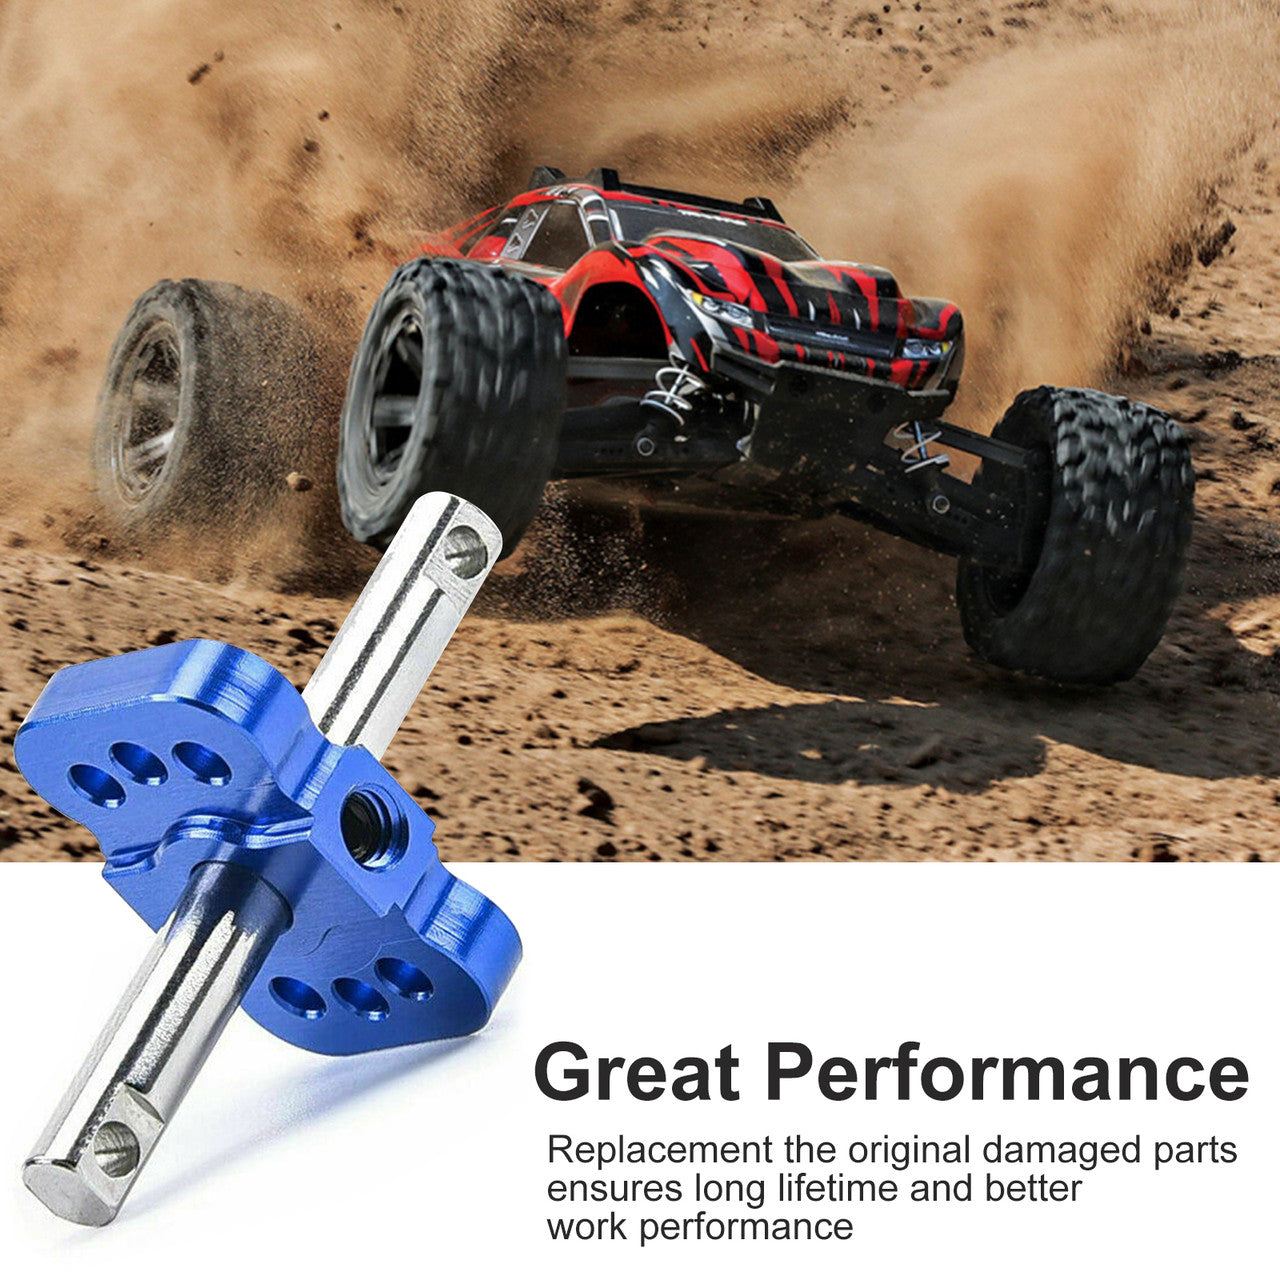 Differential Case / Locker Spool that is Durable and Weat-Resistant, For 1/10 Traxxas 2WD